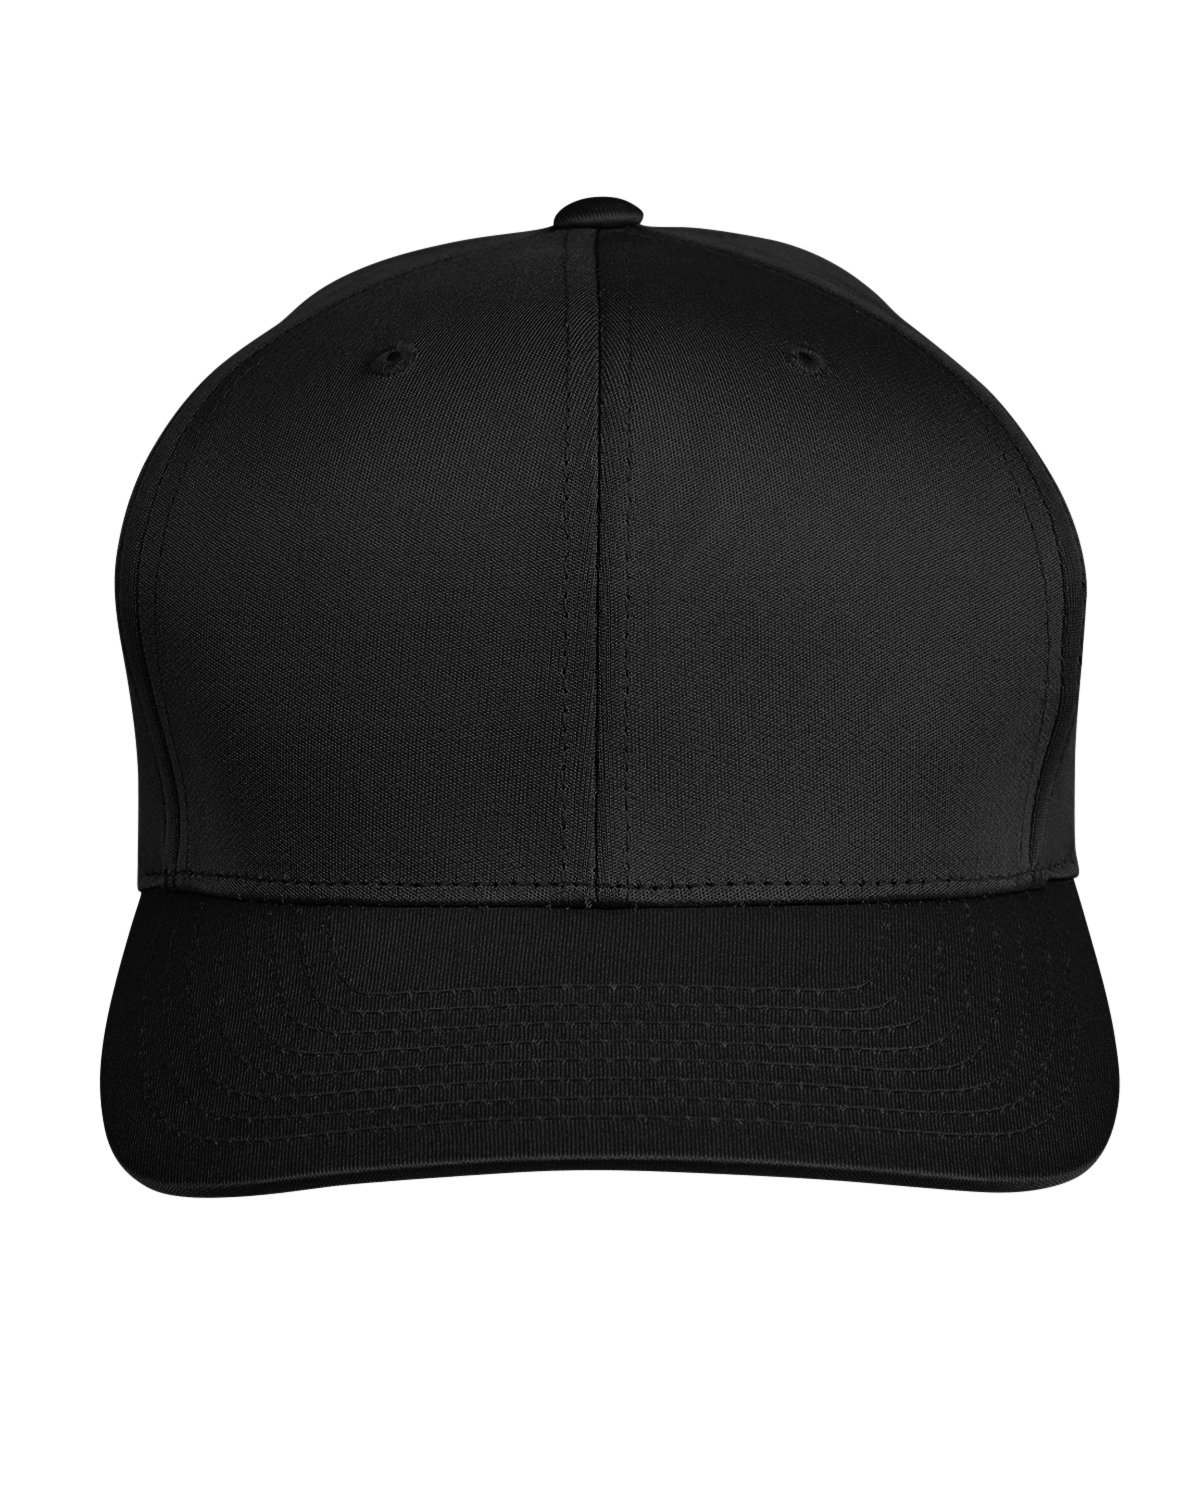 Team 365 by Yupoong® Adult Zone Performance Cap BLACK 